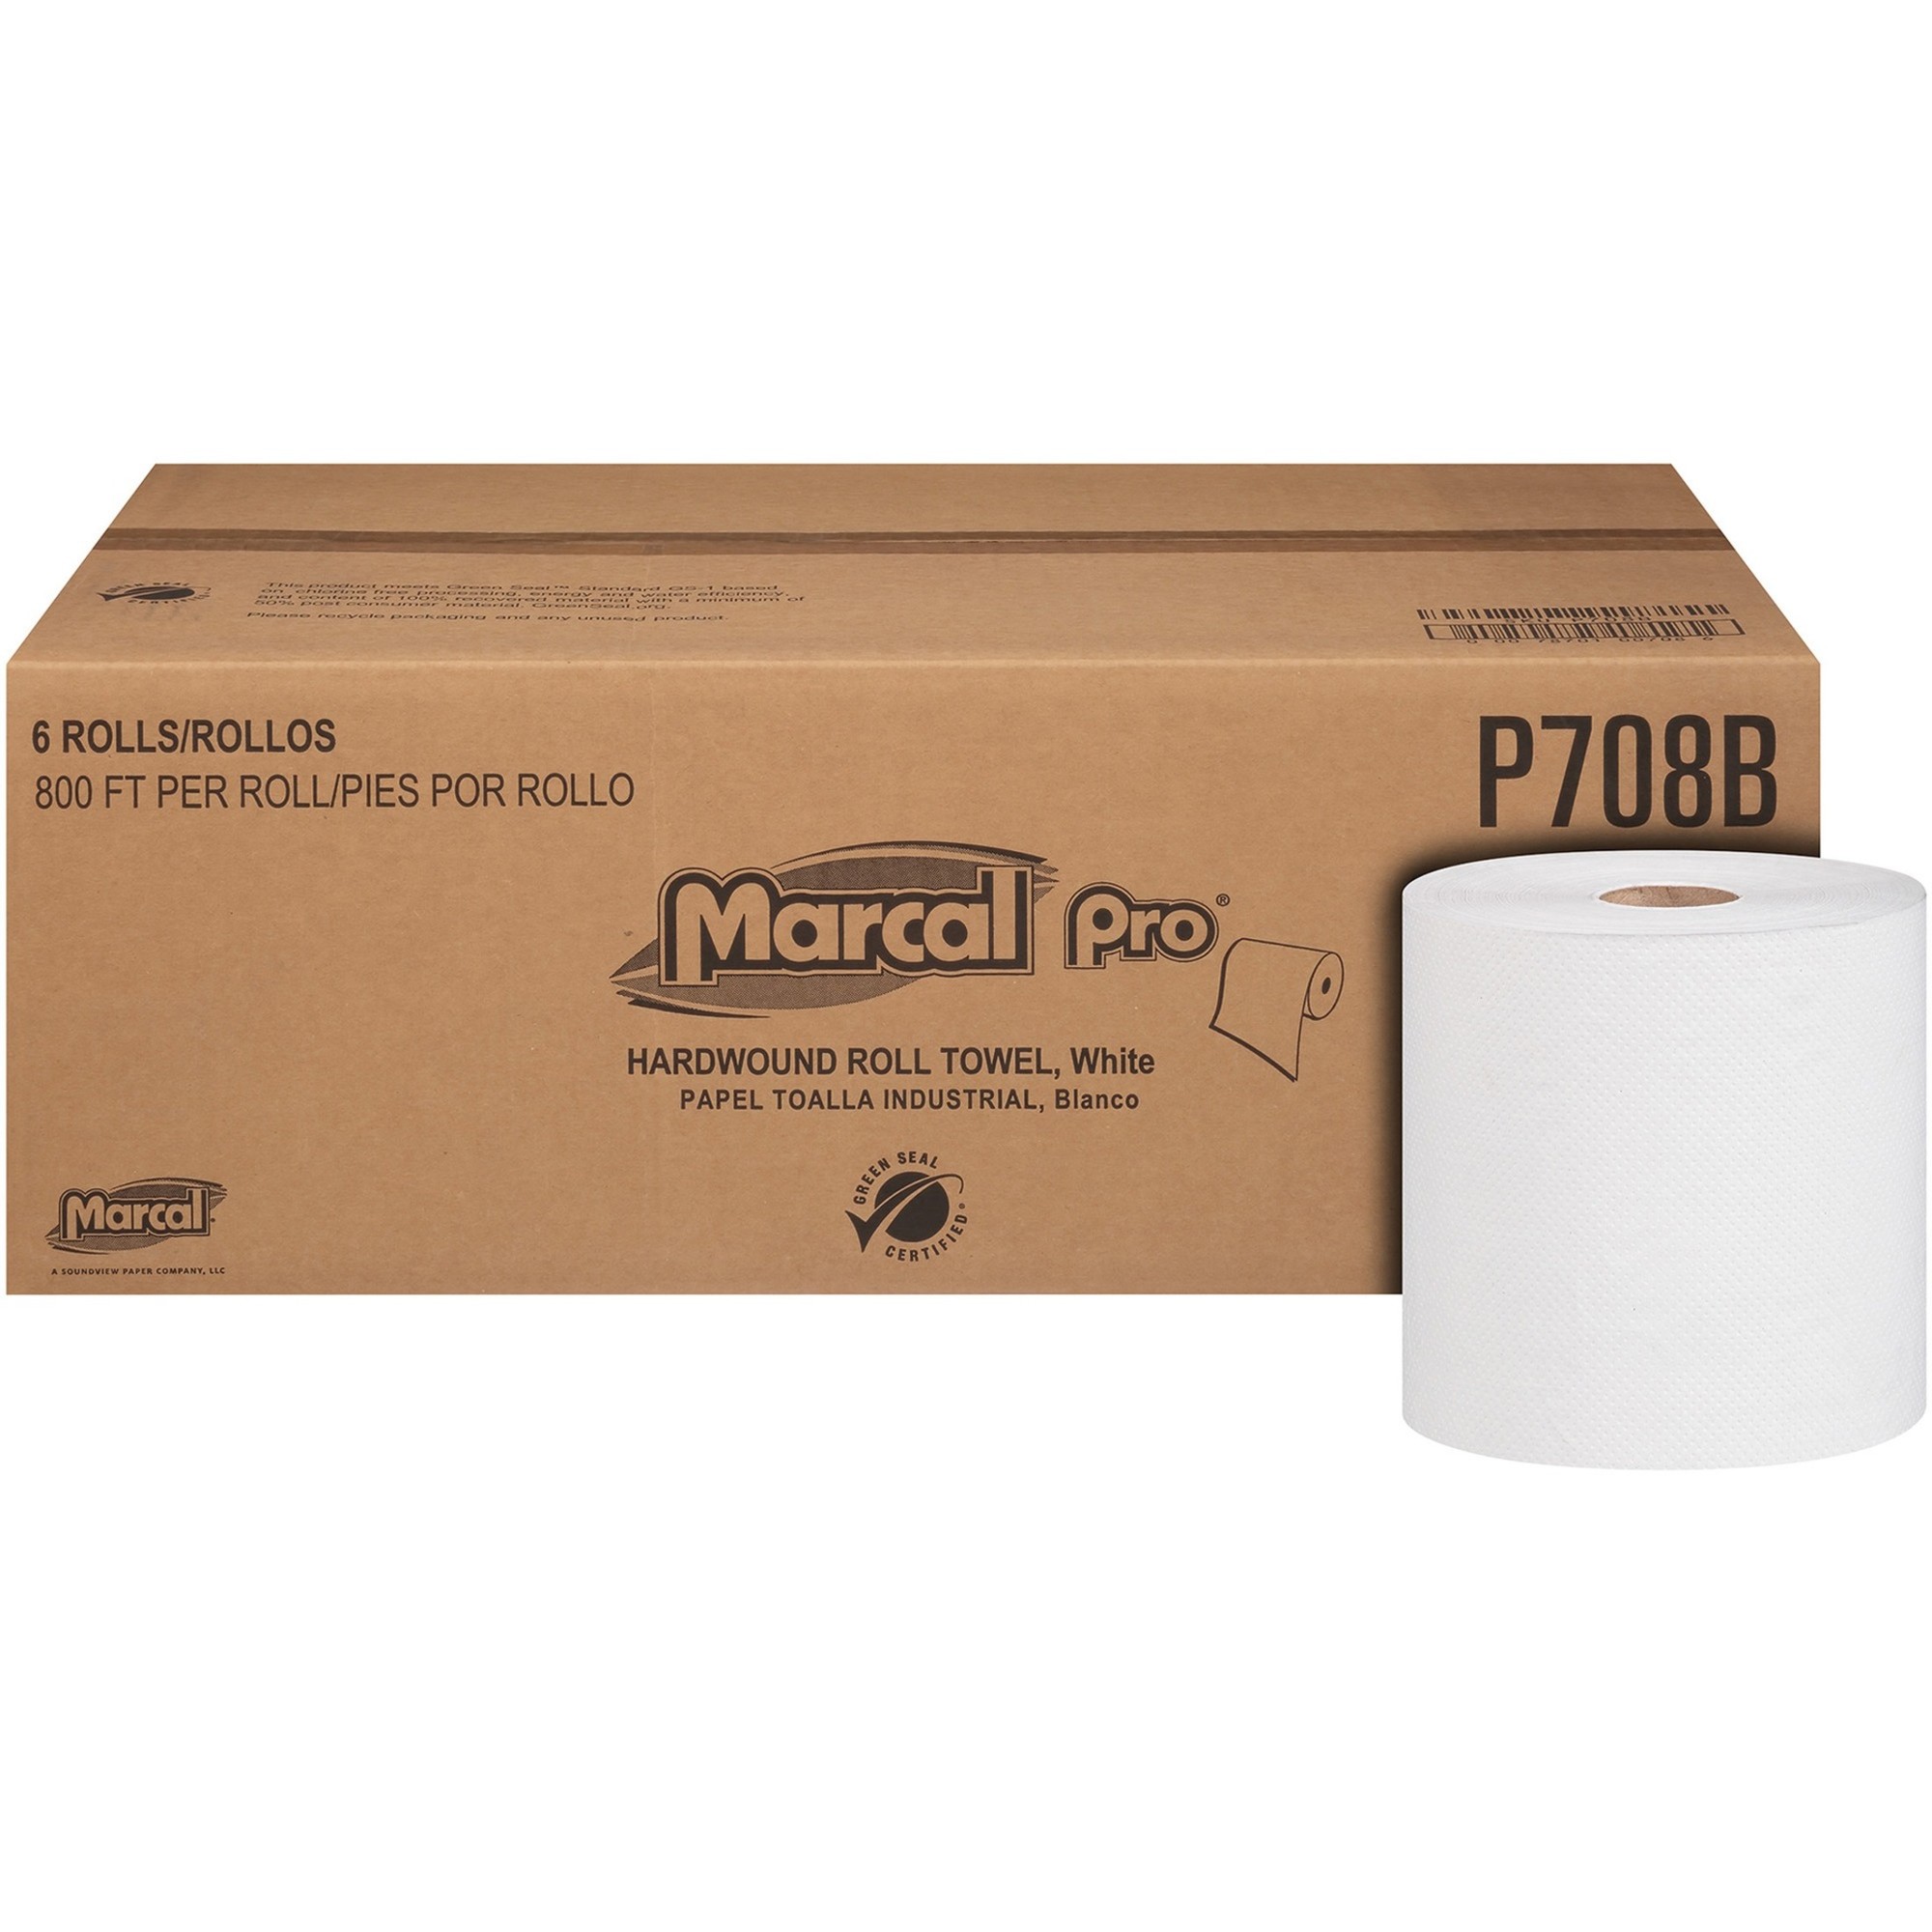 Marcal Hardwound Roll Towel - 1 Ply - 7.87" x 800 ft - White - Paper - Chlorine-free, Lint-free, Bleach-free, Hypoallergenic - 6